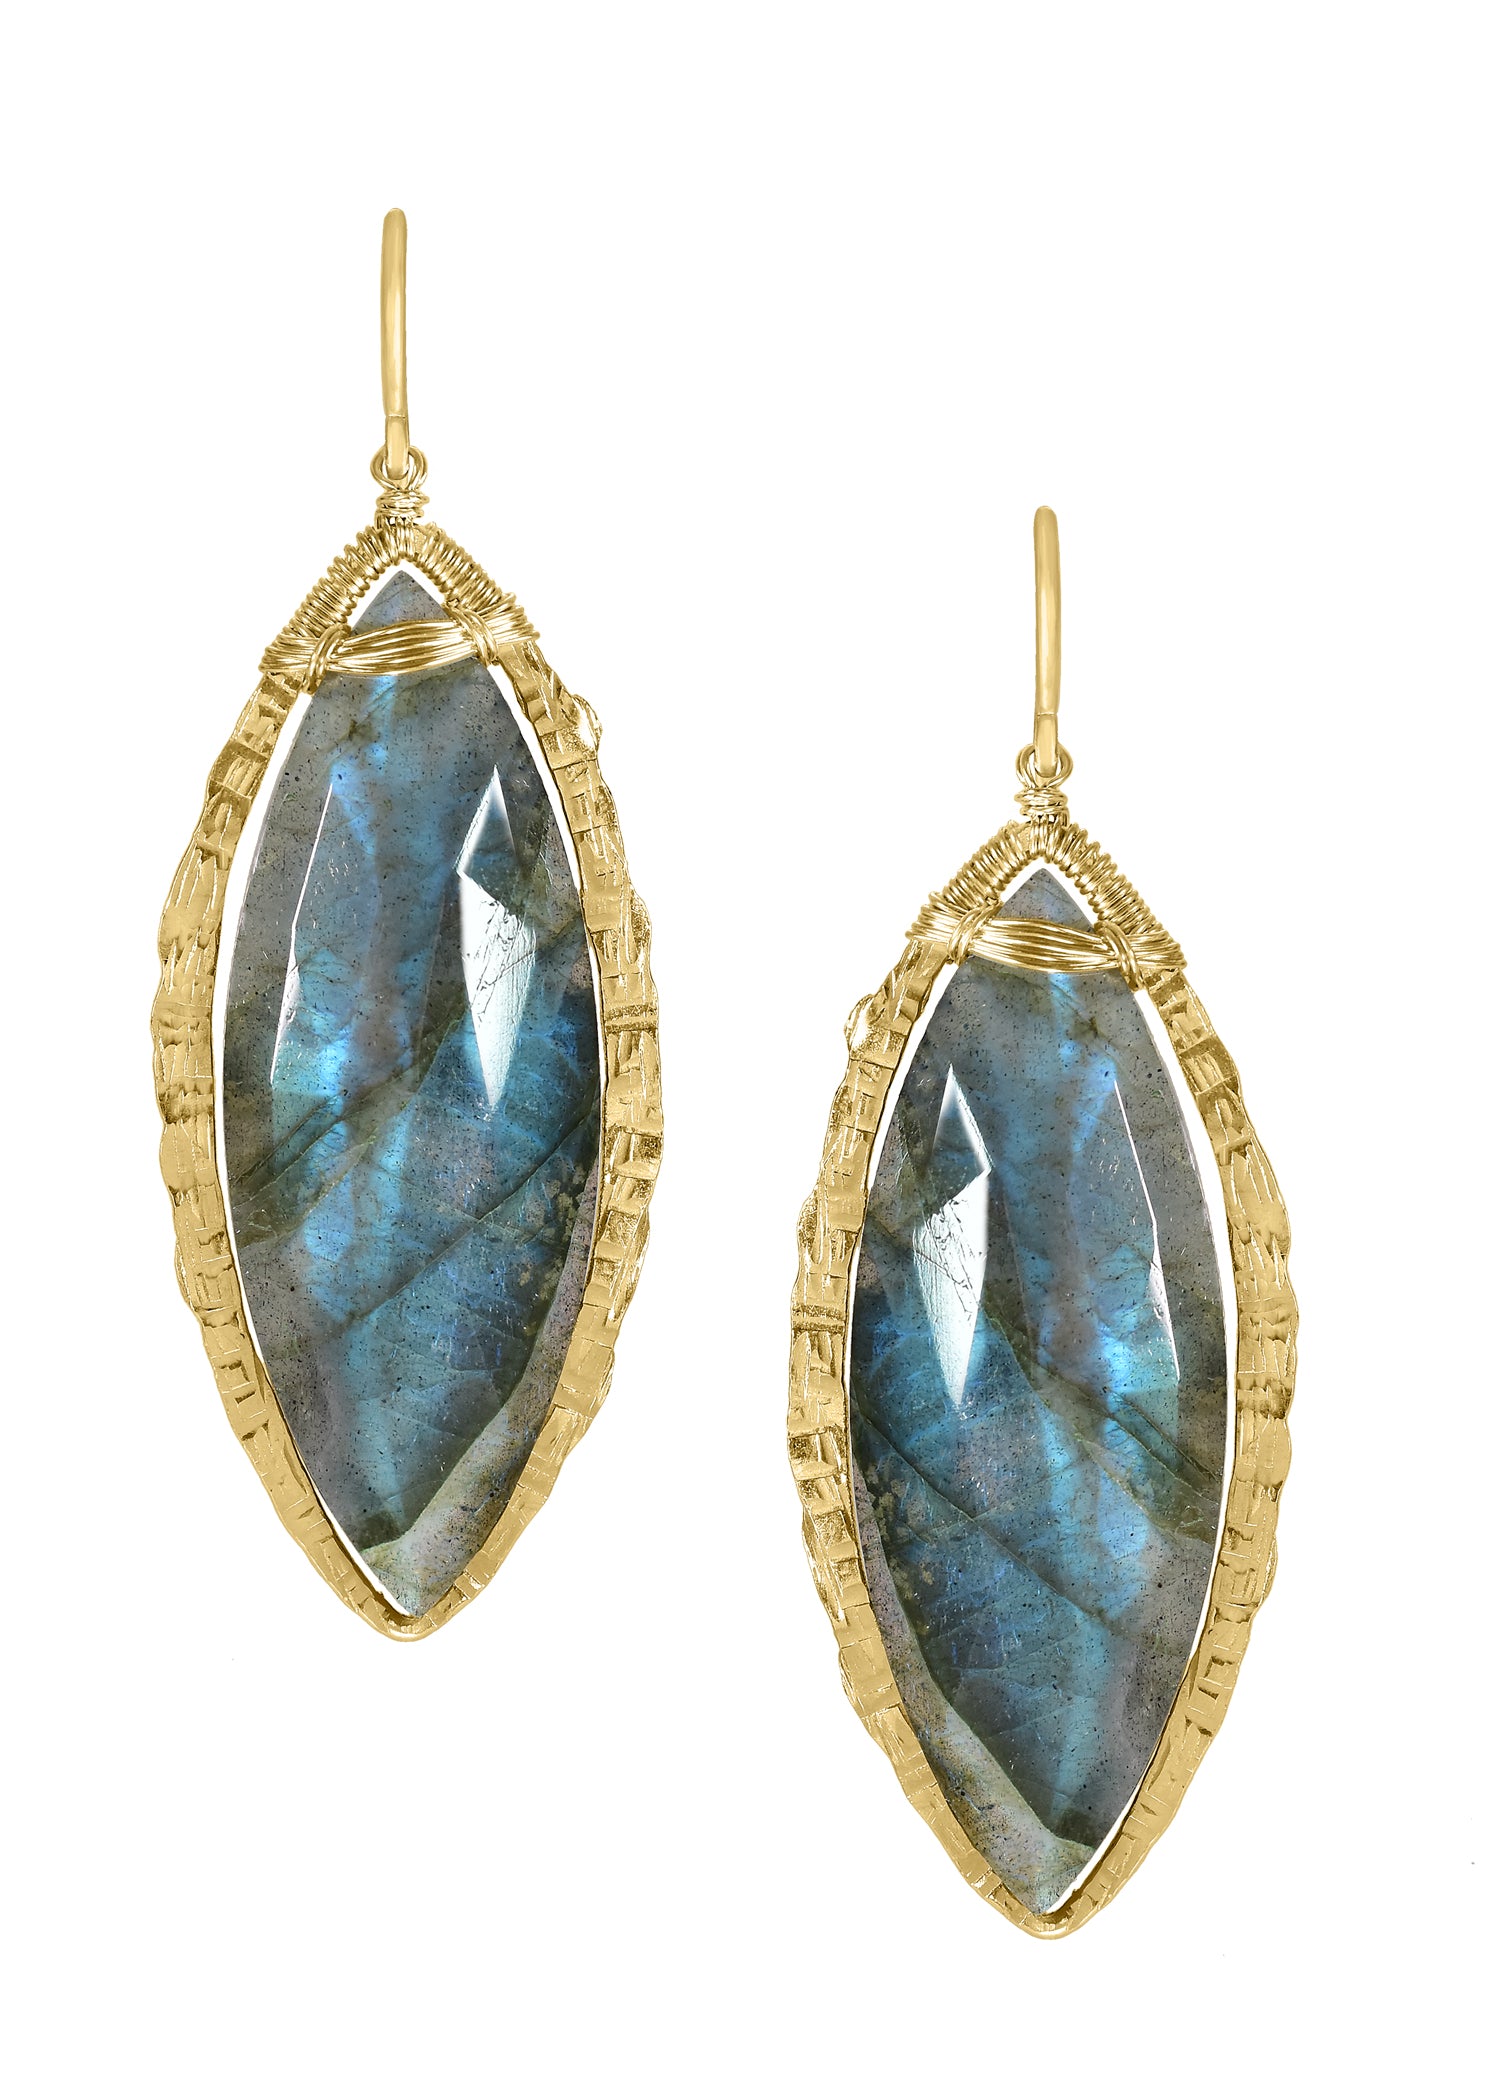 Labradorite 14k gold fill Earring measures 2" in length (including the ear wires) and 5/8" in width at the widest point Handmade in our Los Angeles studio